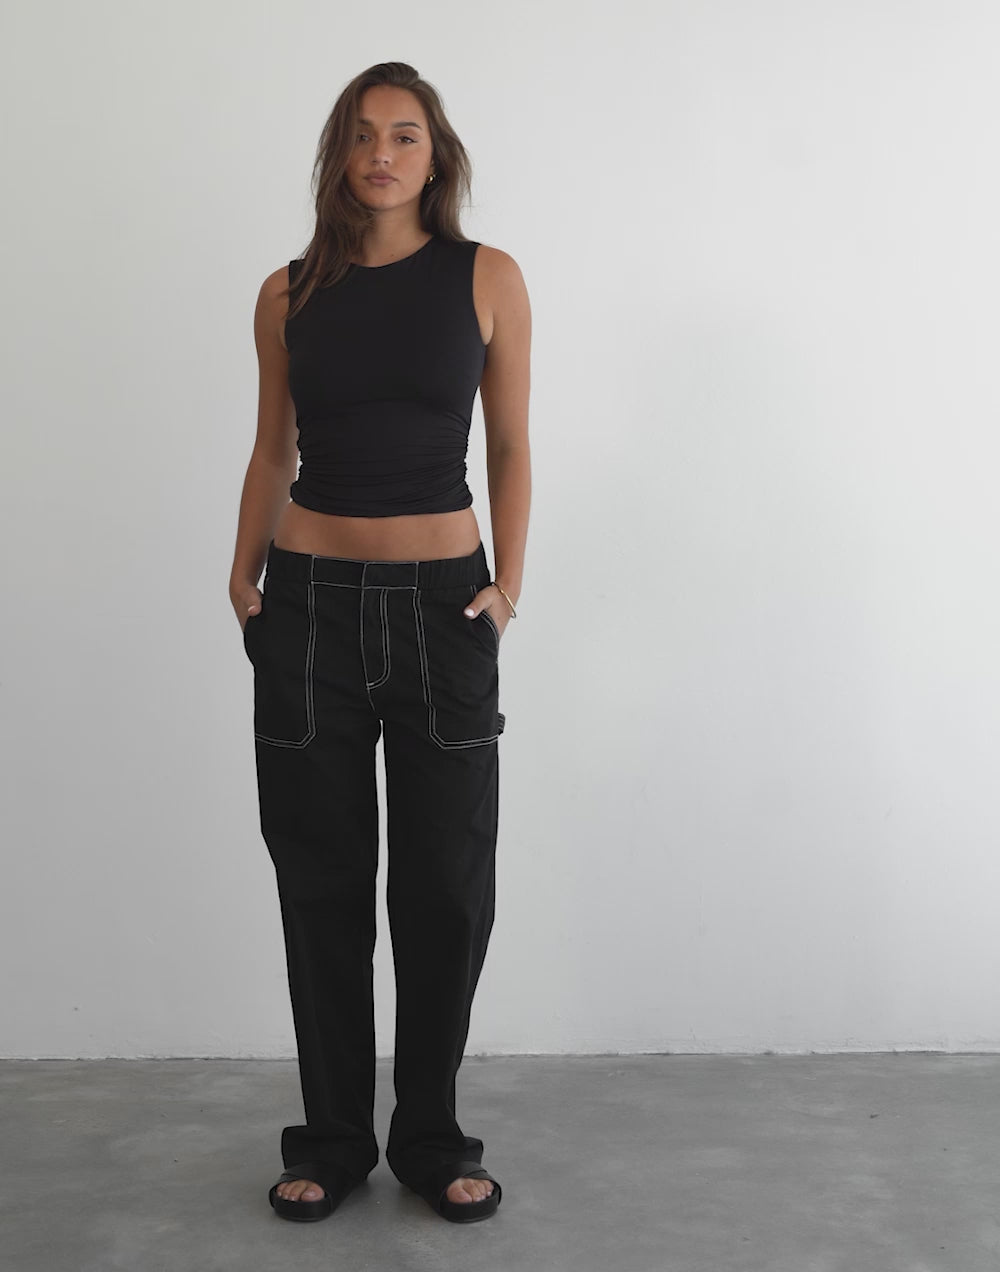 Fountain Tailored Pant (Onyx) - By Lioness